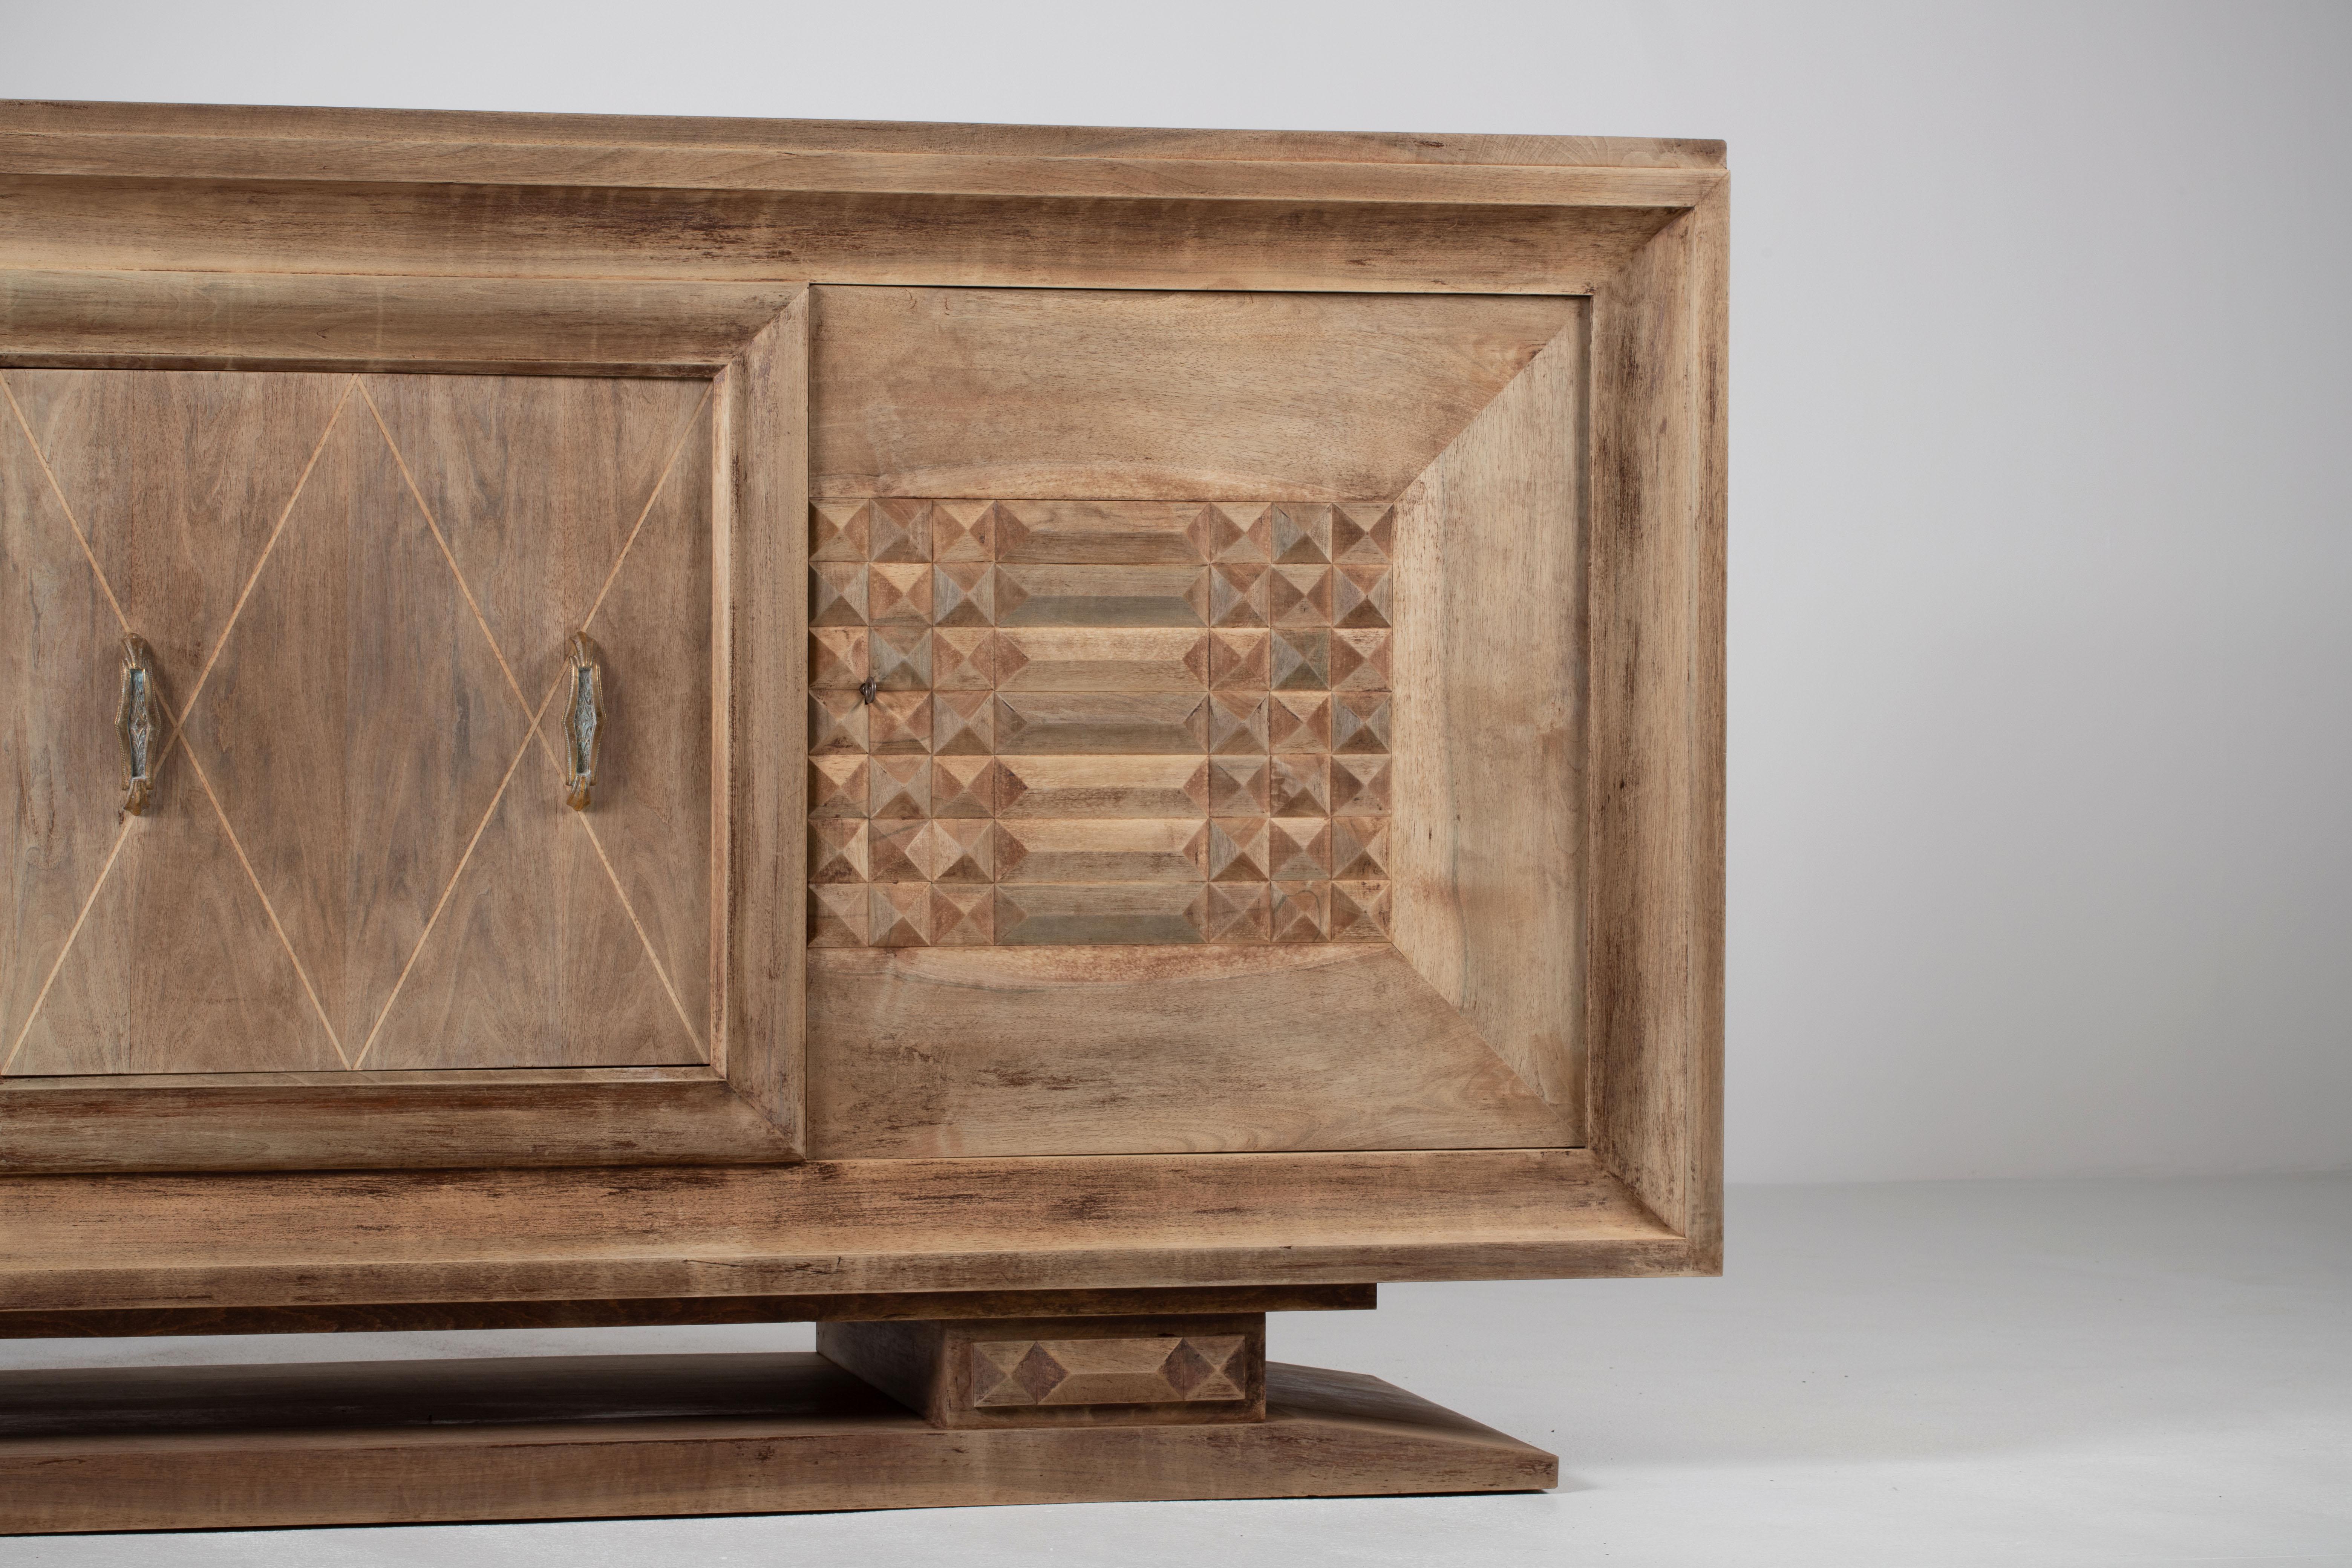 Bleached Art Deco Solid Oak Sideboard with Geometric Details, France, 1940s For Sale 3